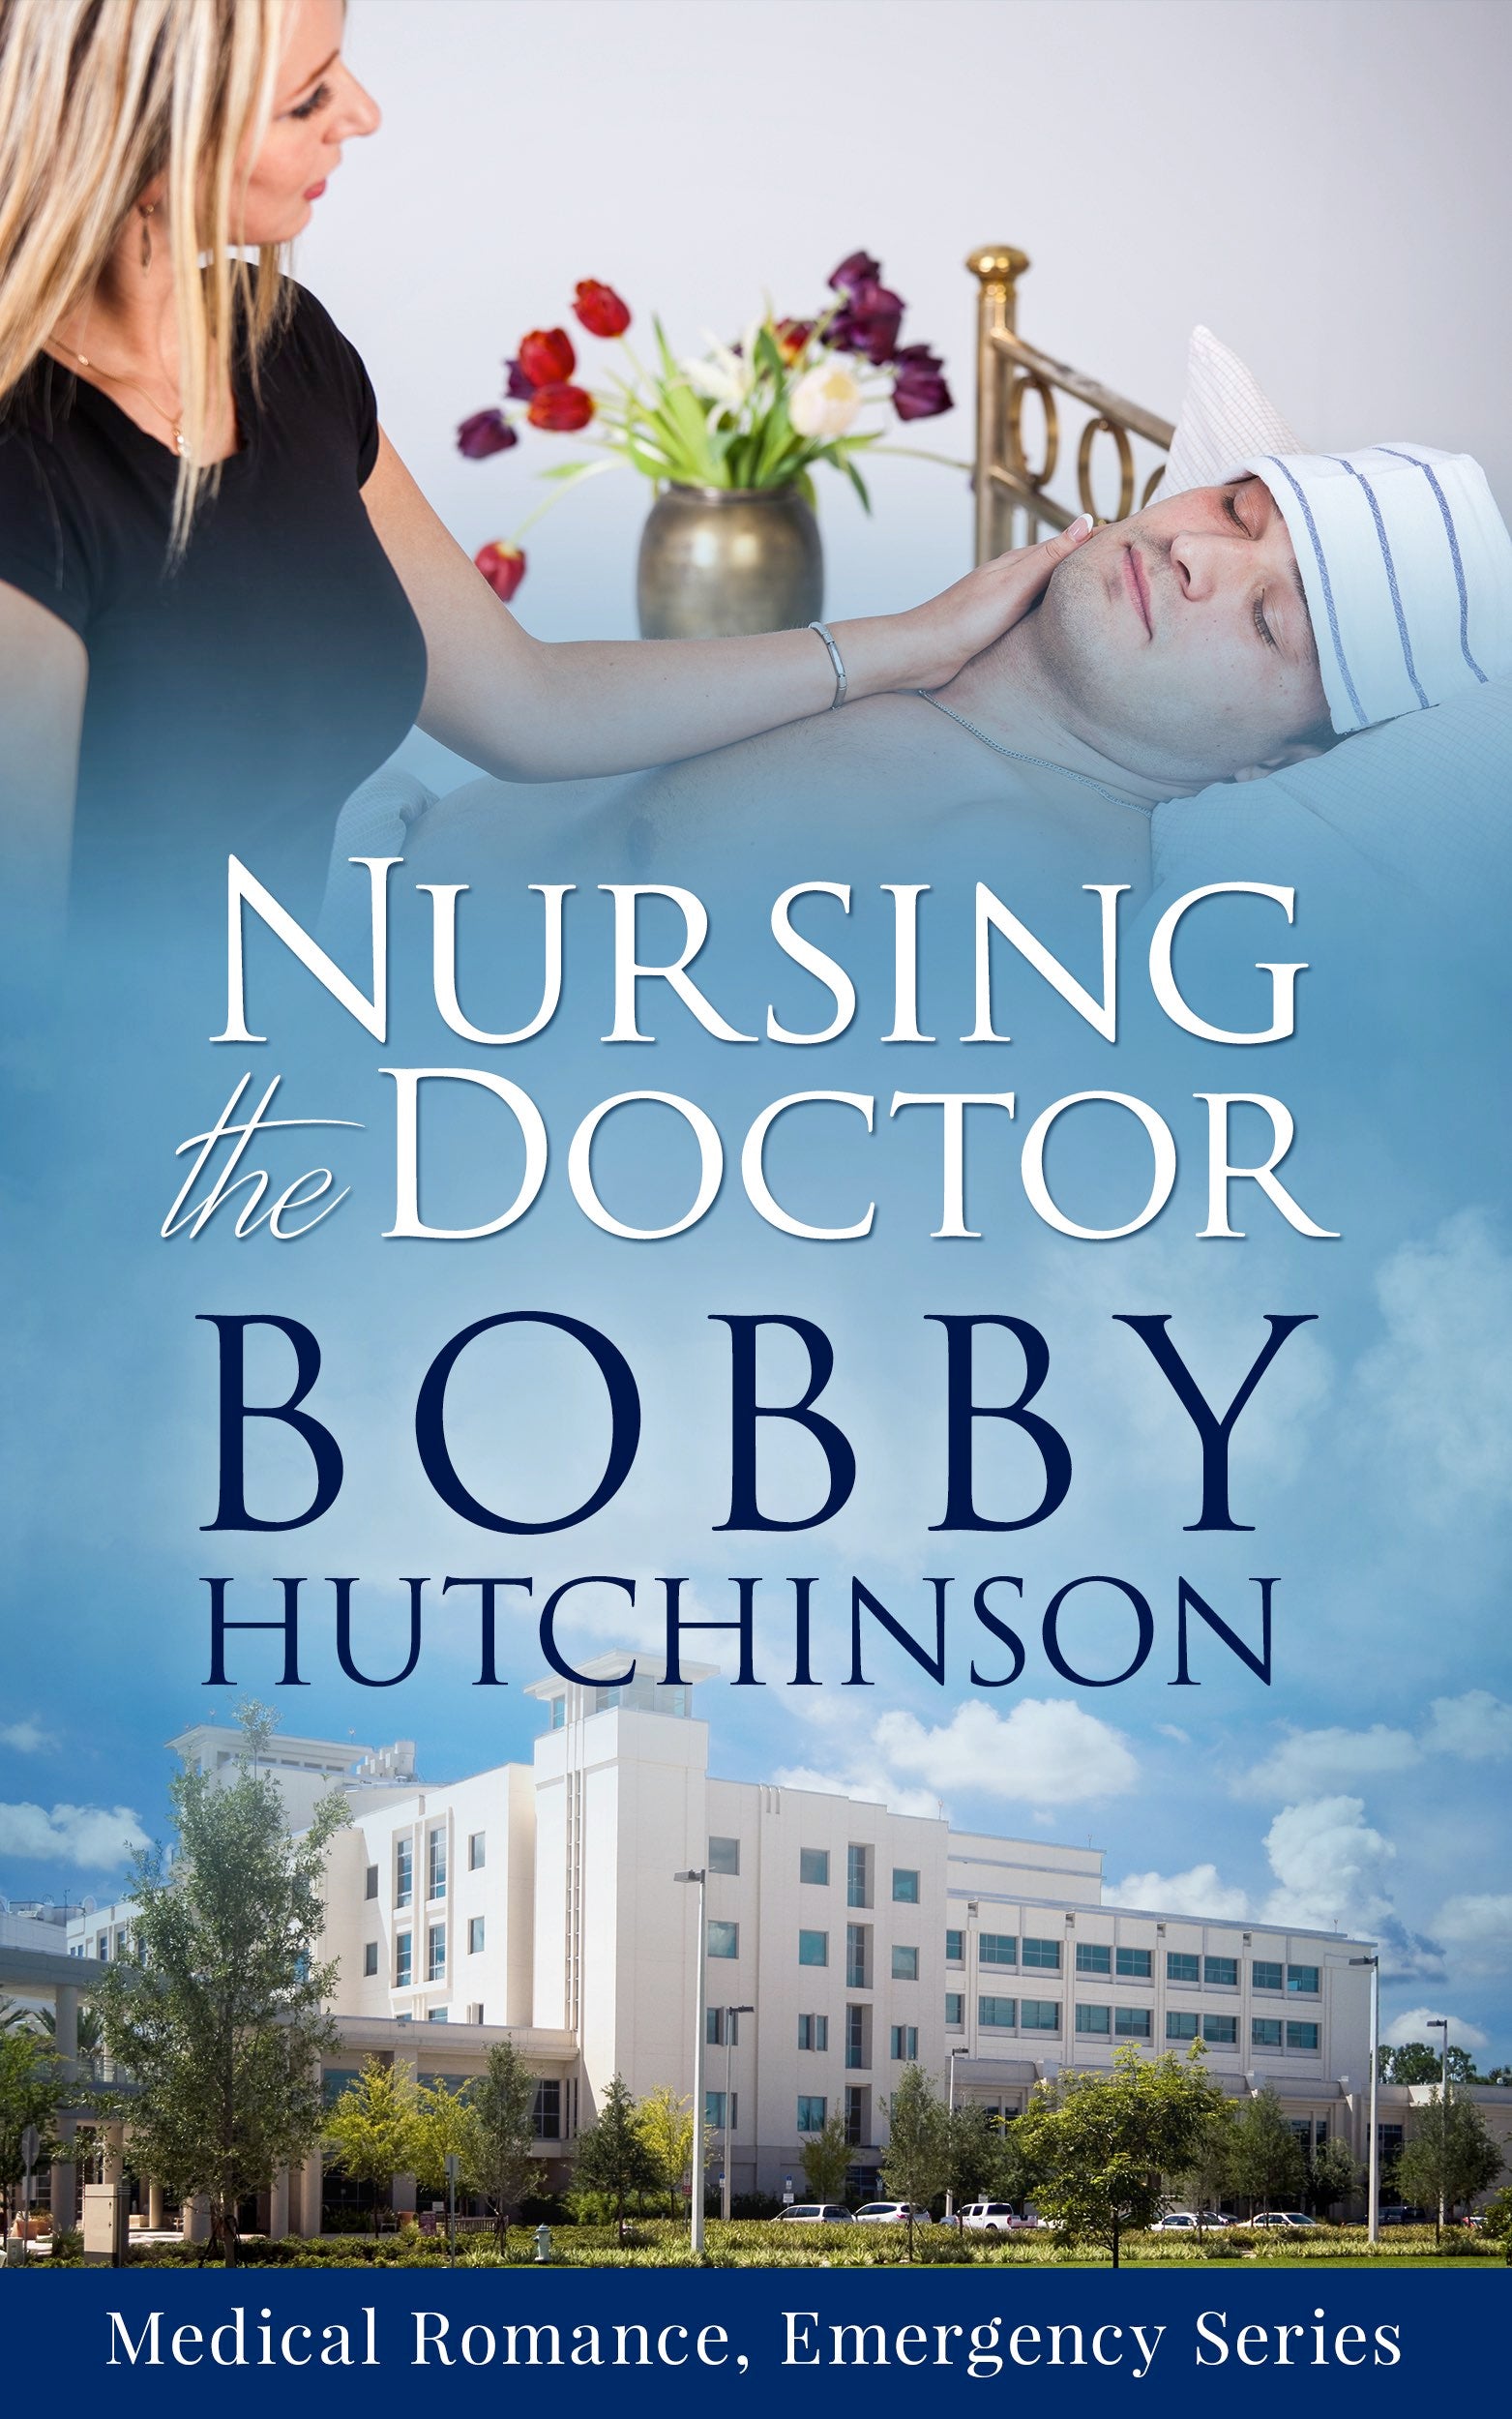 Nursing the Doctor by Bobby Hutchinson